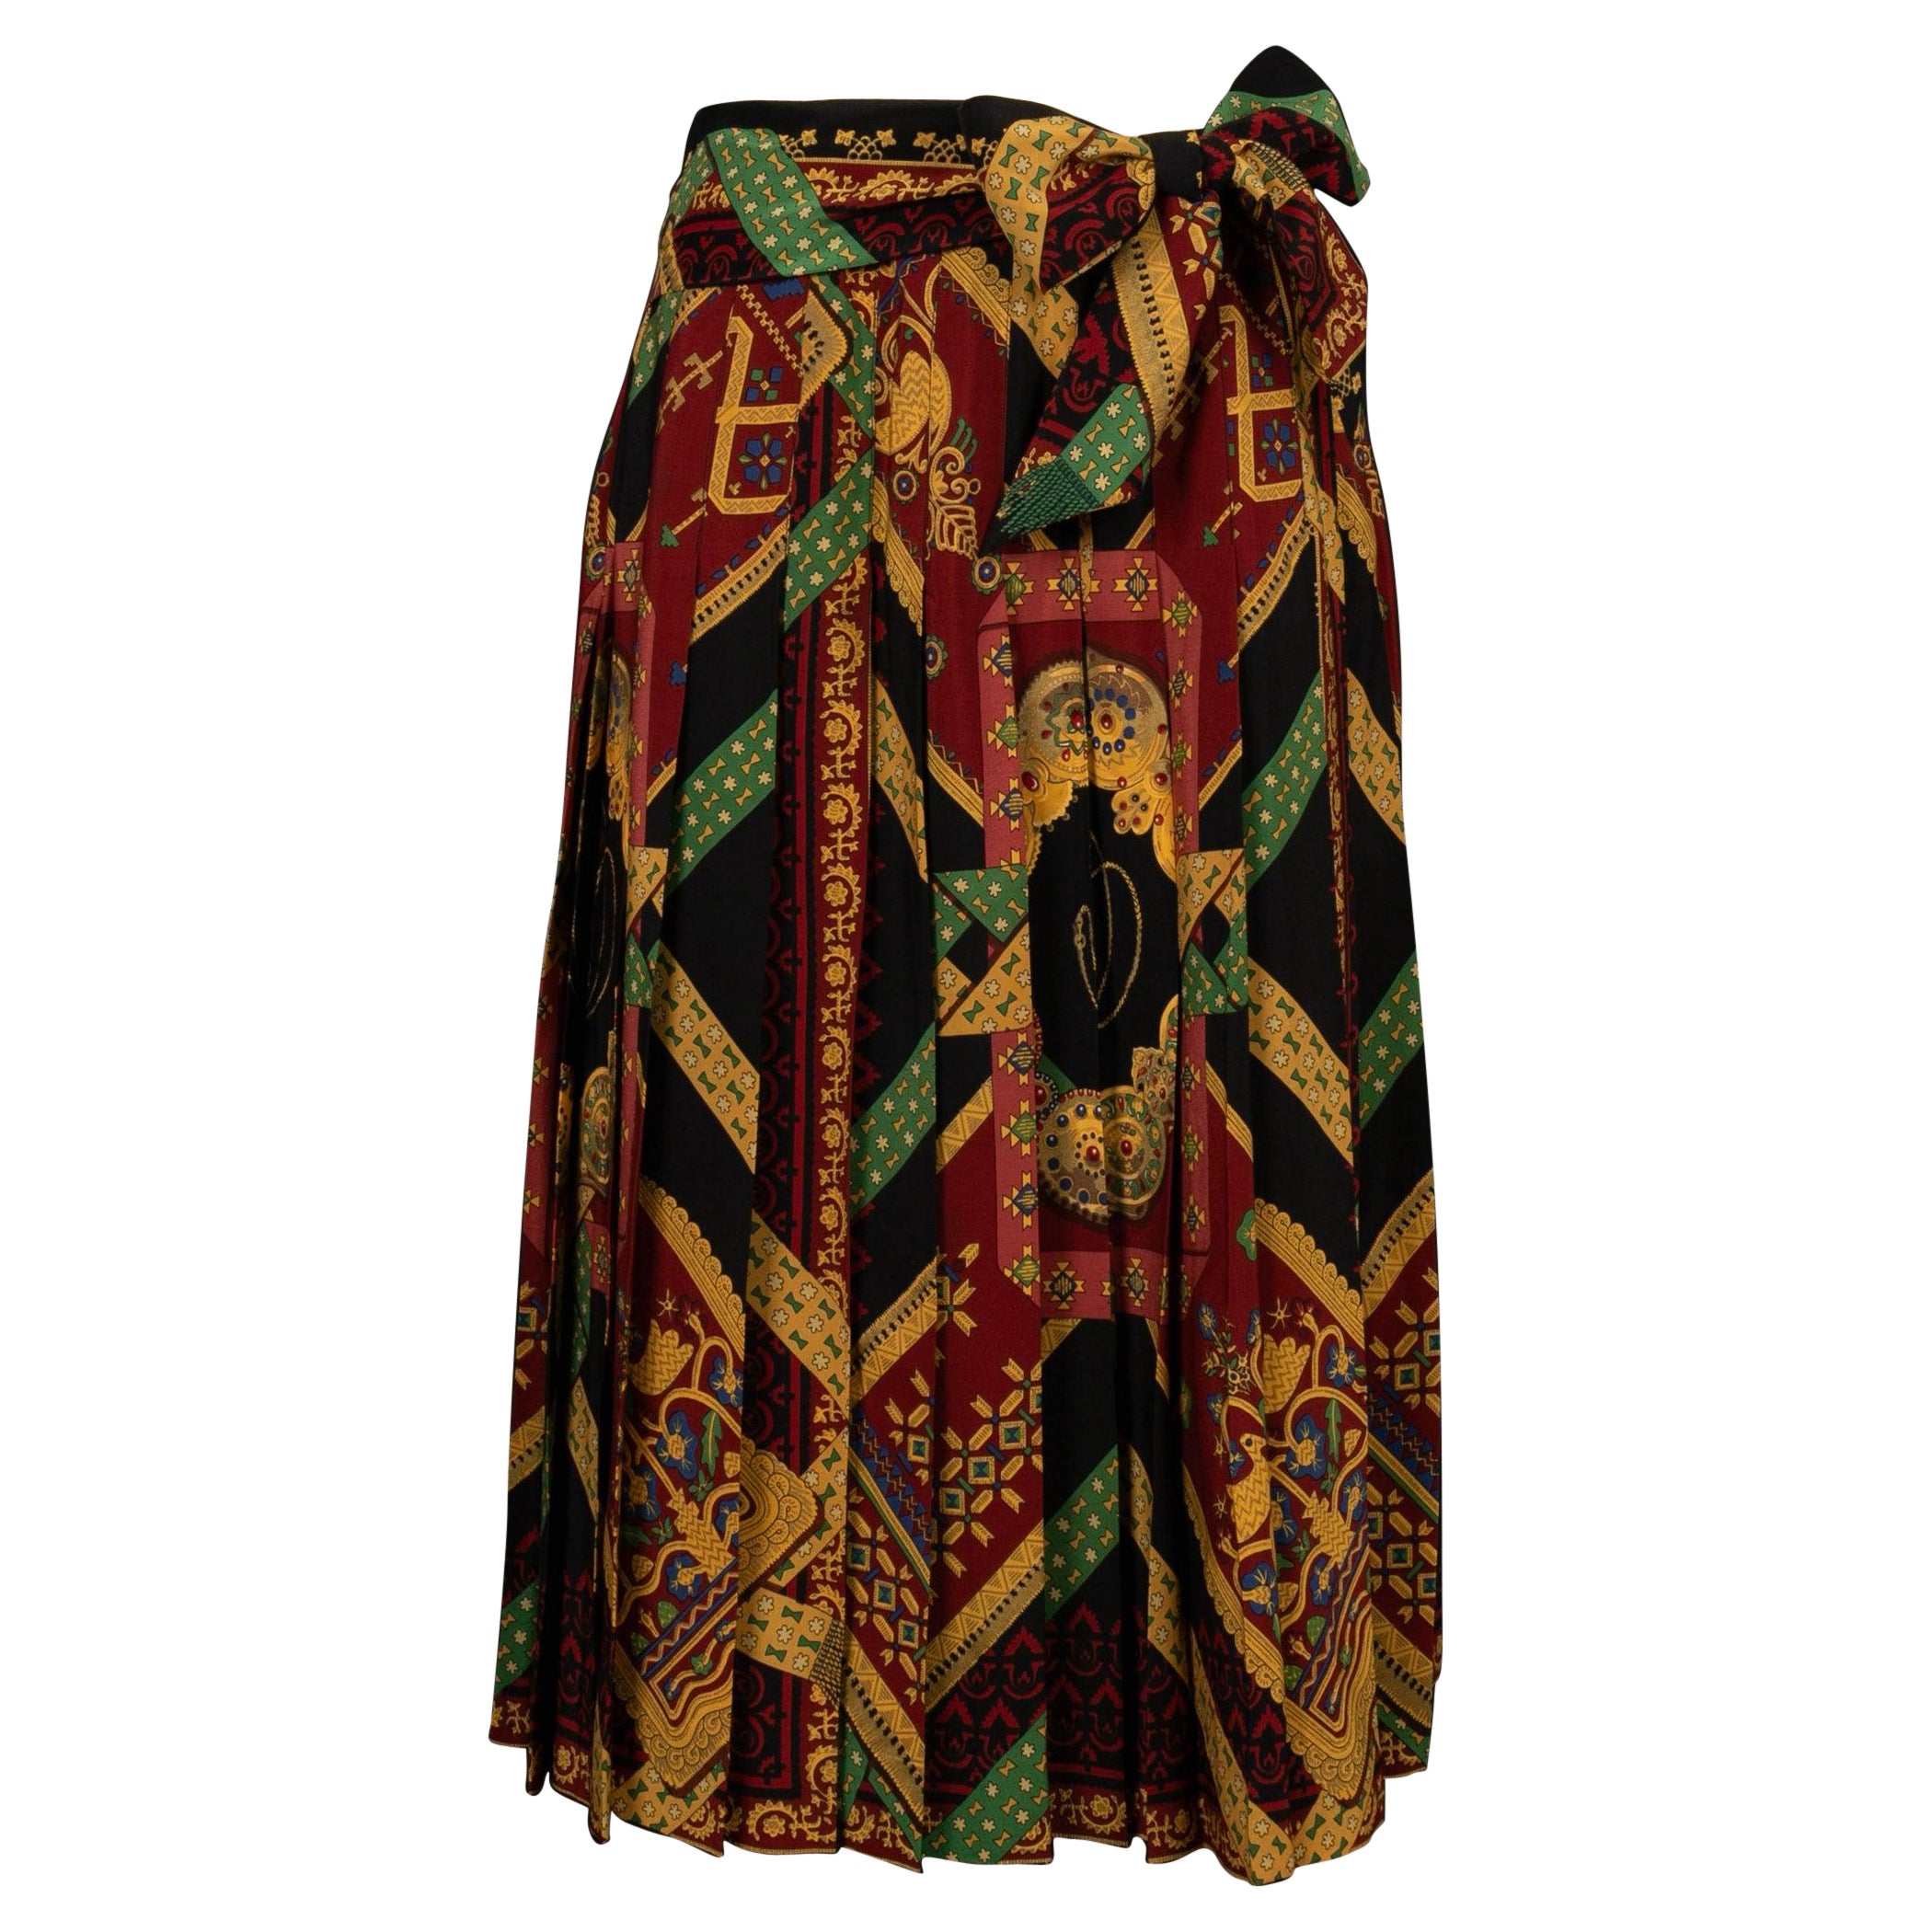 Hermès Silk Skirt Illustrated with Theme "Brin d'or", 1982  For Sale